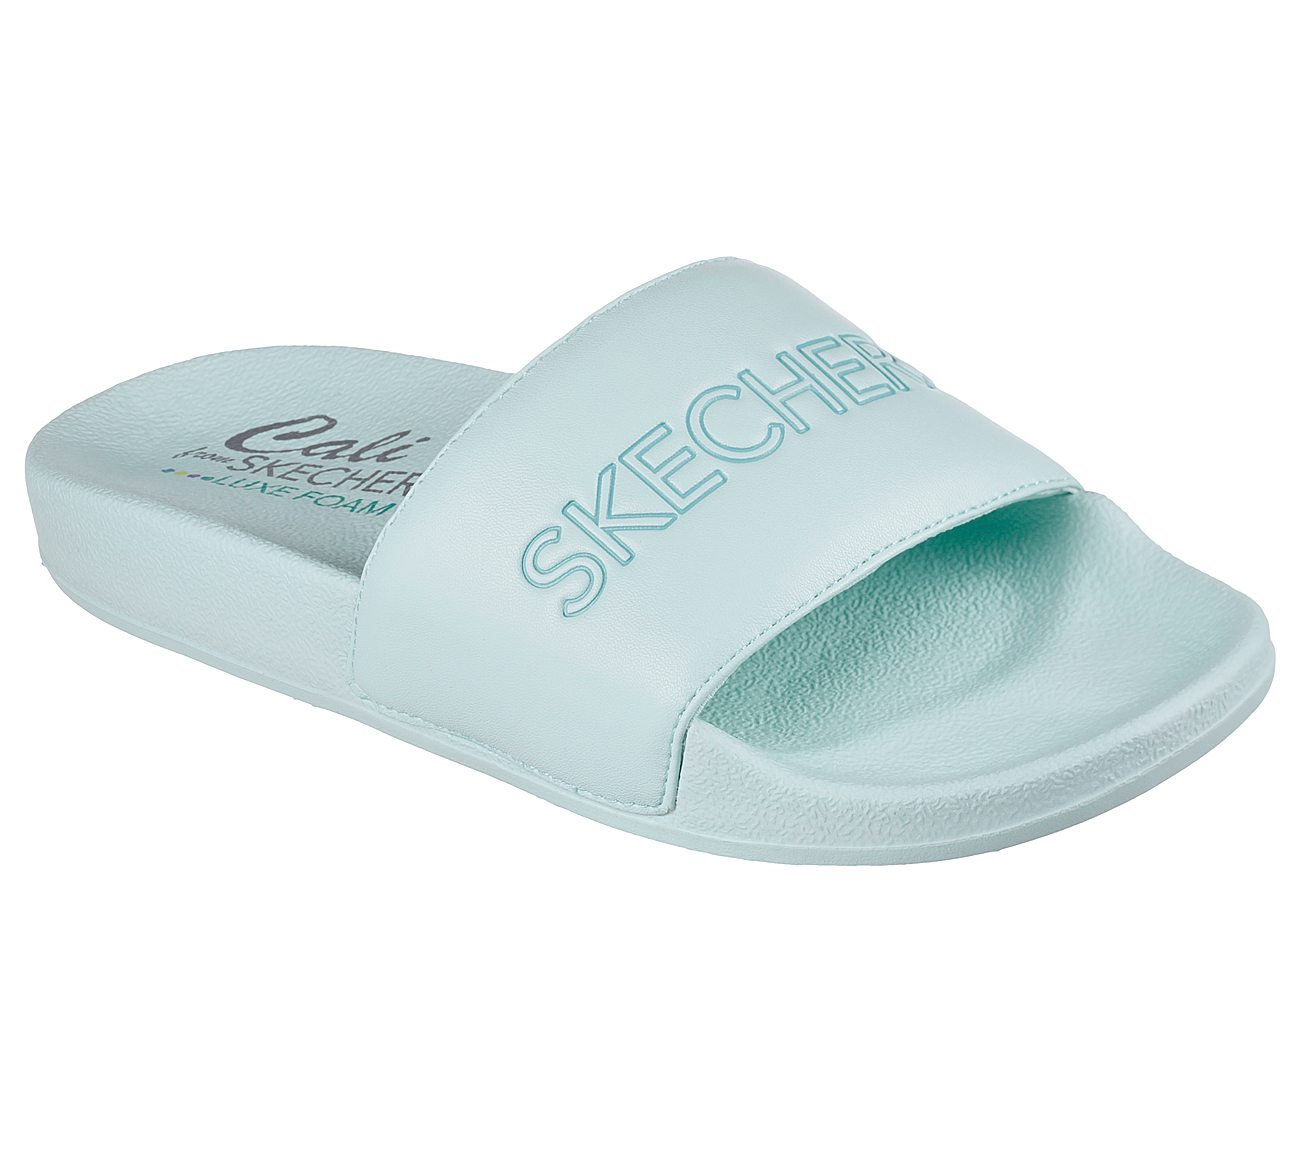 POP UPS - RIGHT TIME, MINT Footwear Lateral View